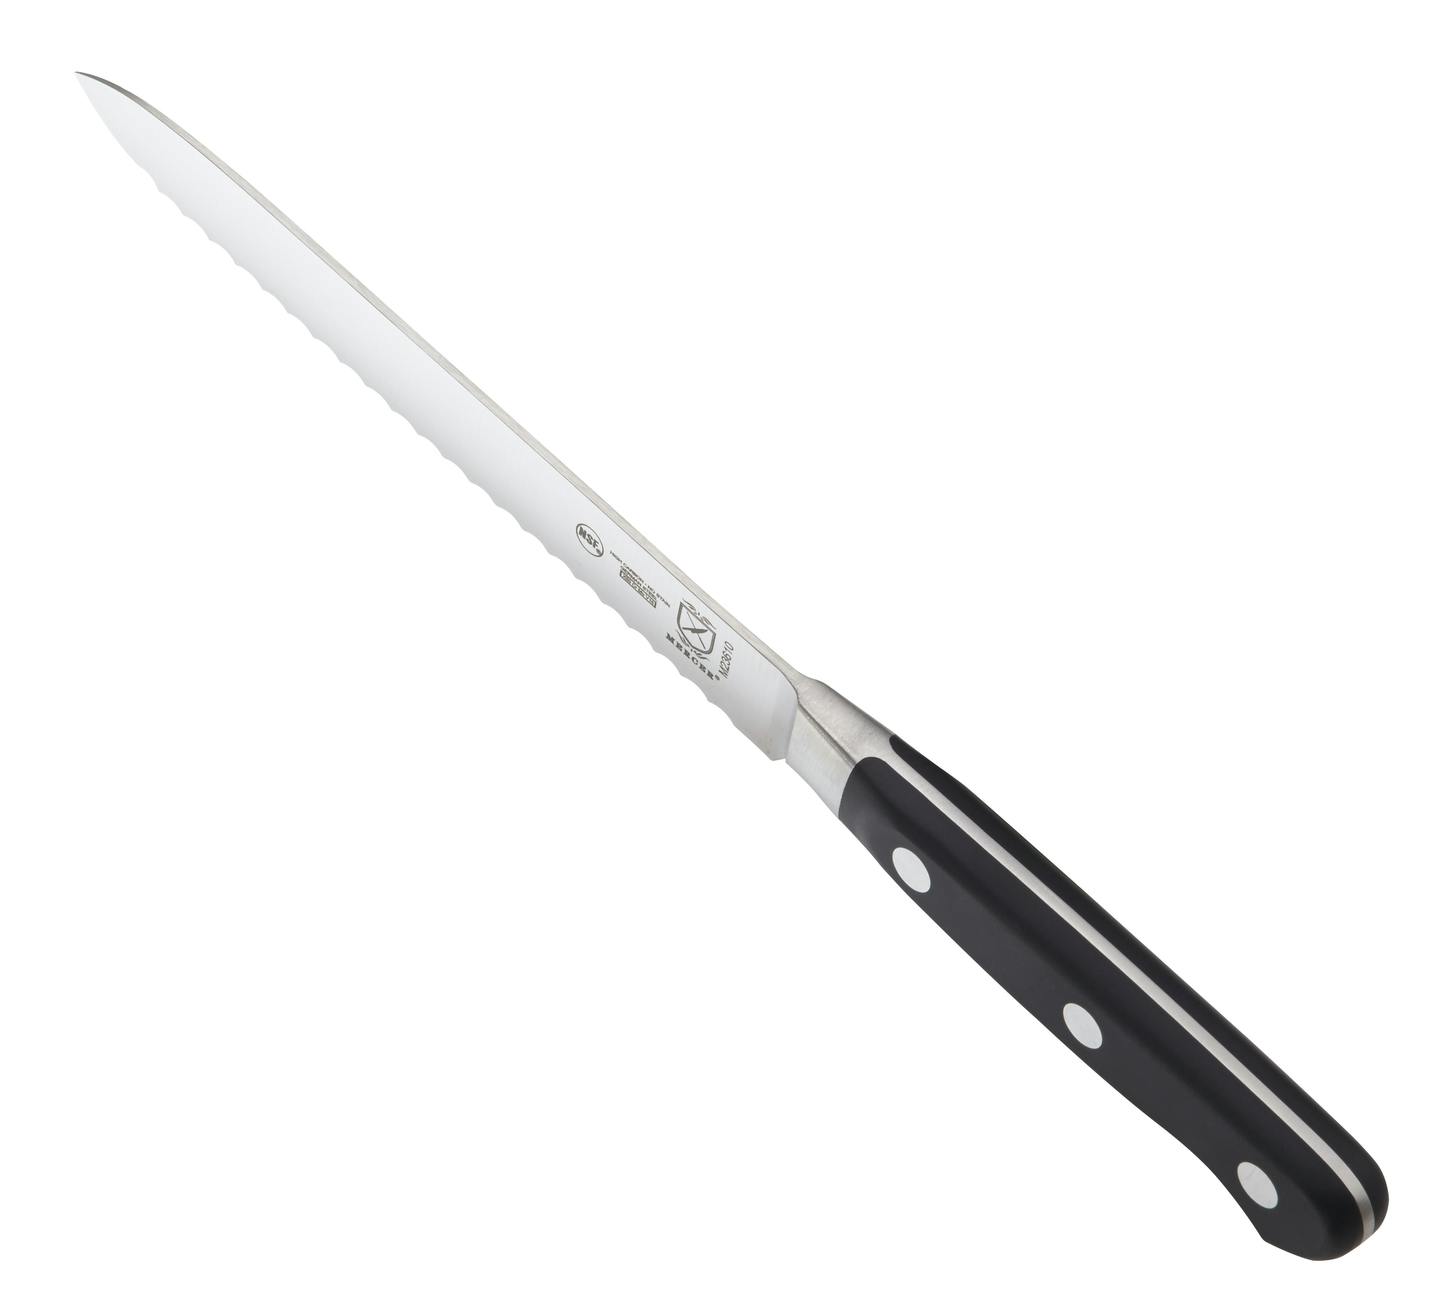 Mercer Culinary Renaissance Forged Tomato Knife, 5 Inch